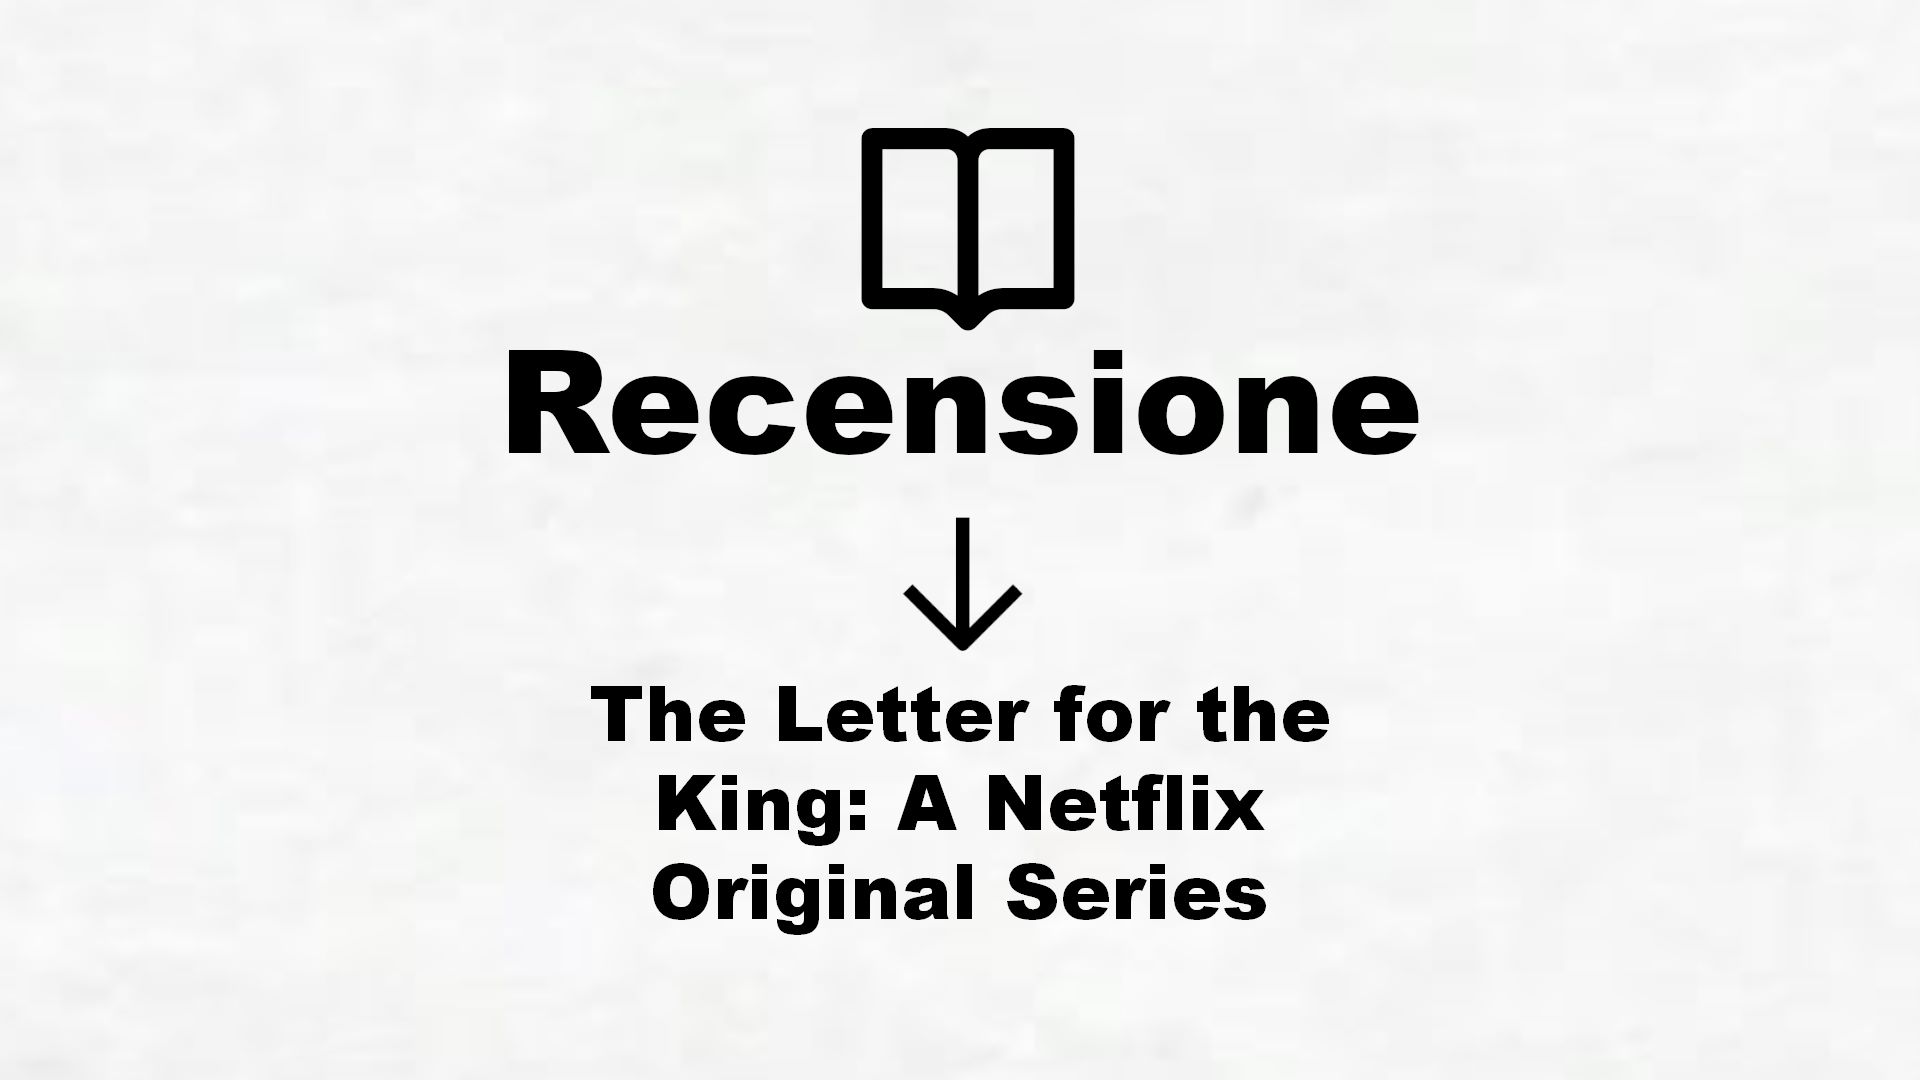 The Letter for the King: A Netflix Original Series – Recensione Libro